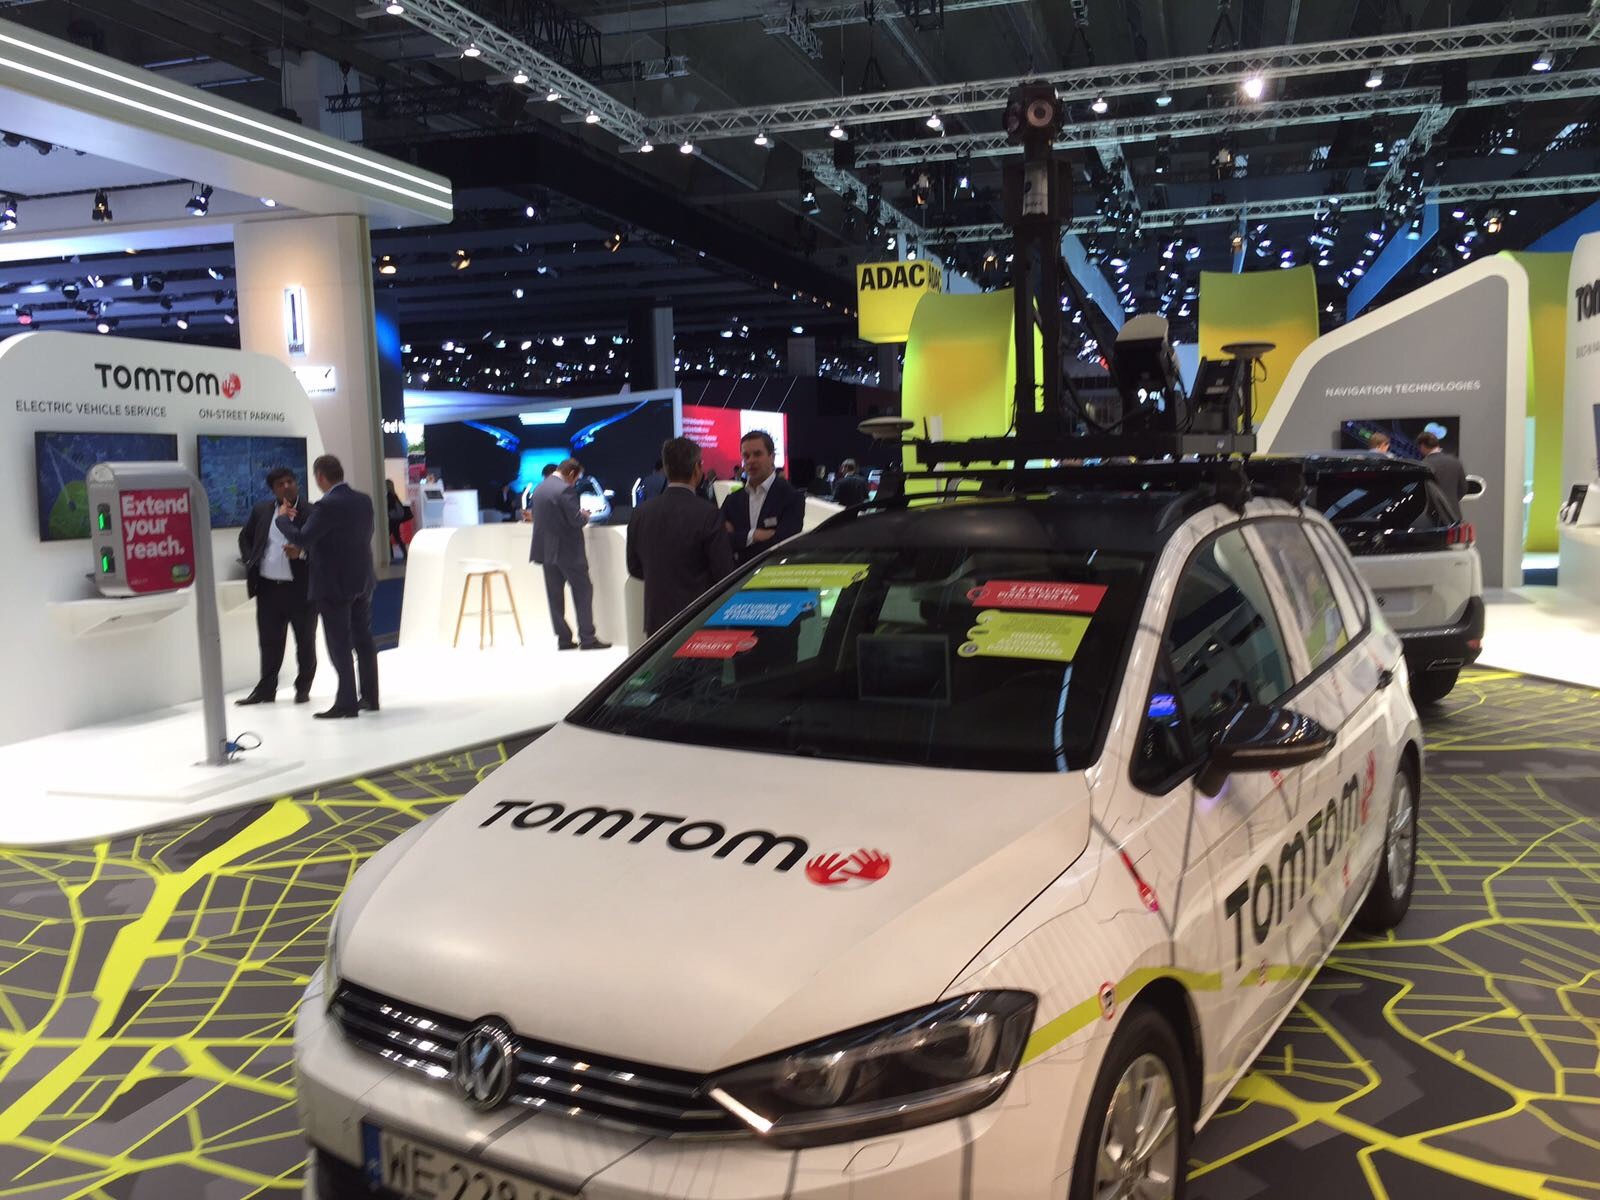 TomTom announced a deal with Daimler who will use TomTom maps for its infotainment platform in North America. They also showcase their real-time EV charging service, which has been developed to help EV drivers to make informed decisions about when and where to charge their vehicles, reducing range anxiety.